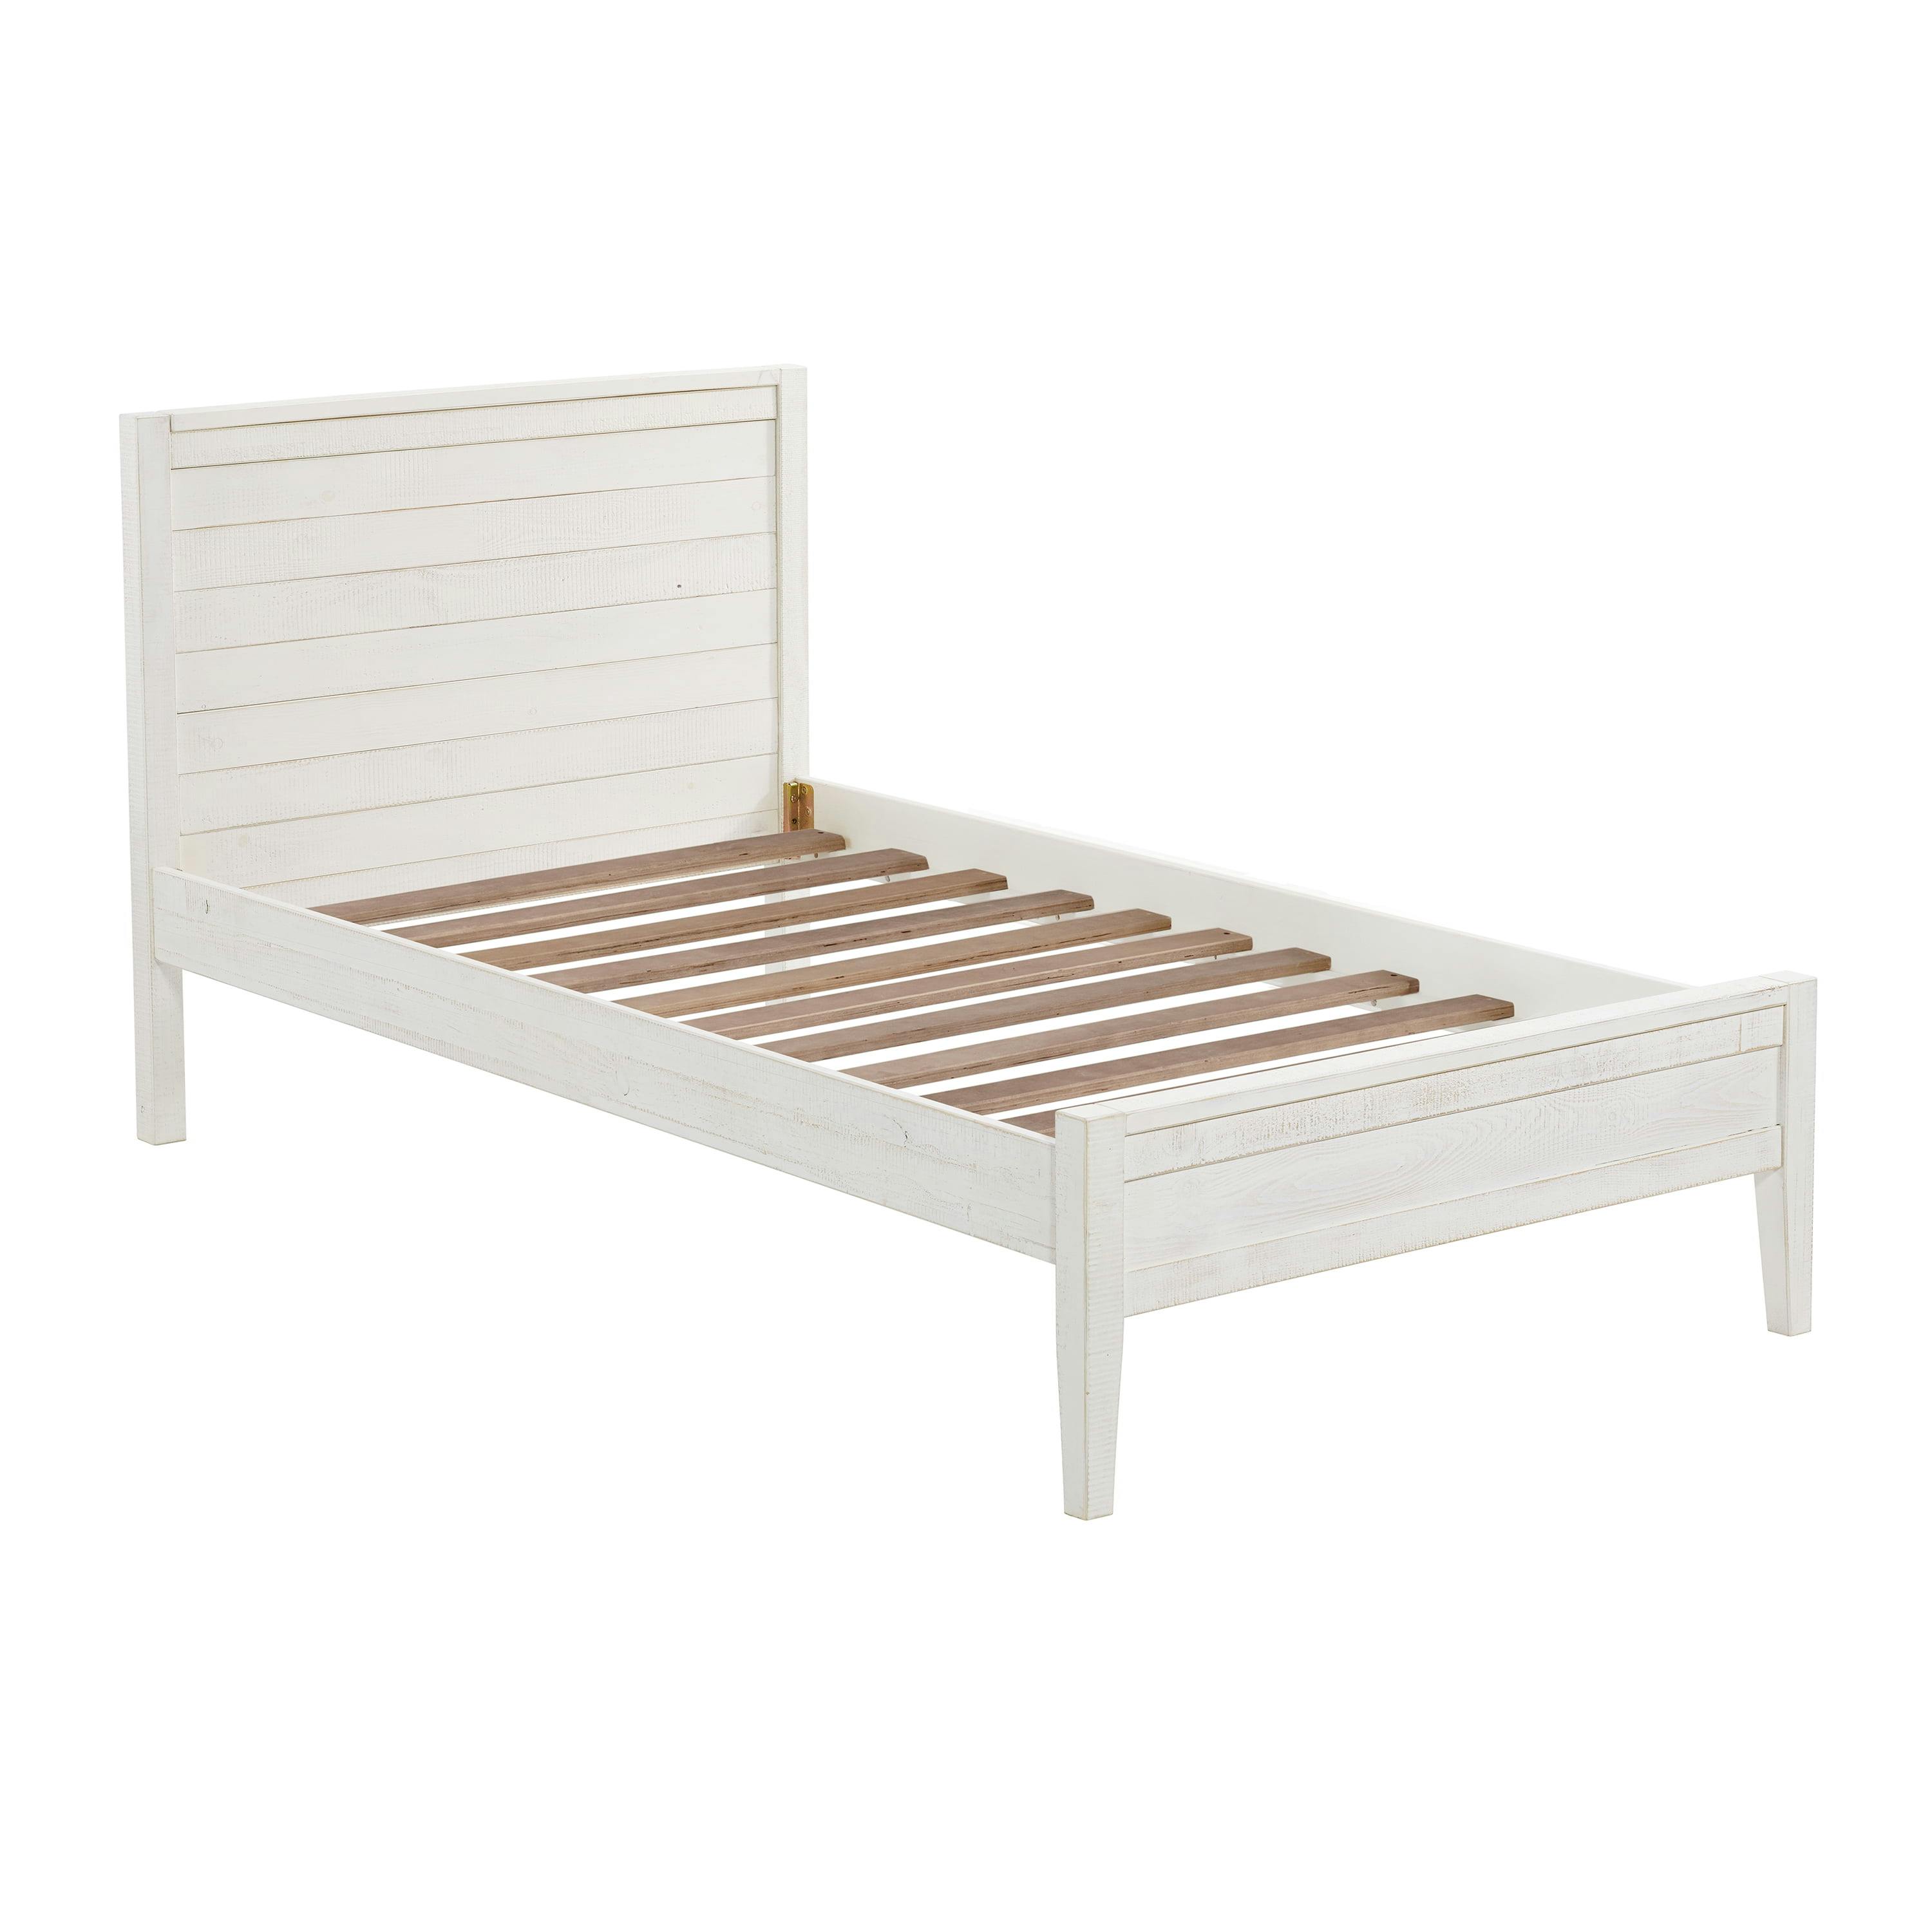 Driftwood White Pine Twin Bed with Upholstered Headboard and Storage Drawer